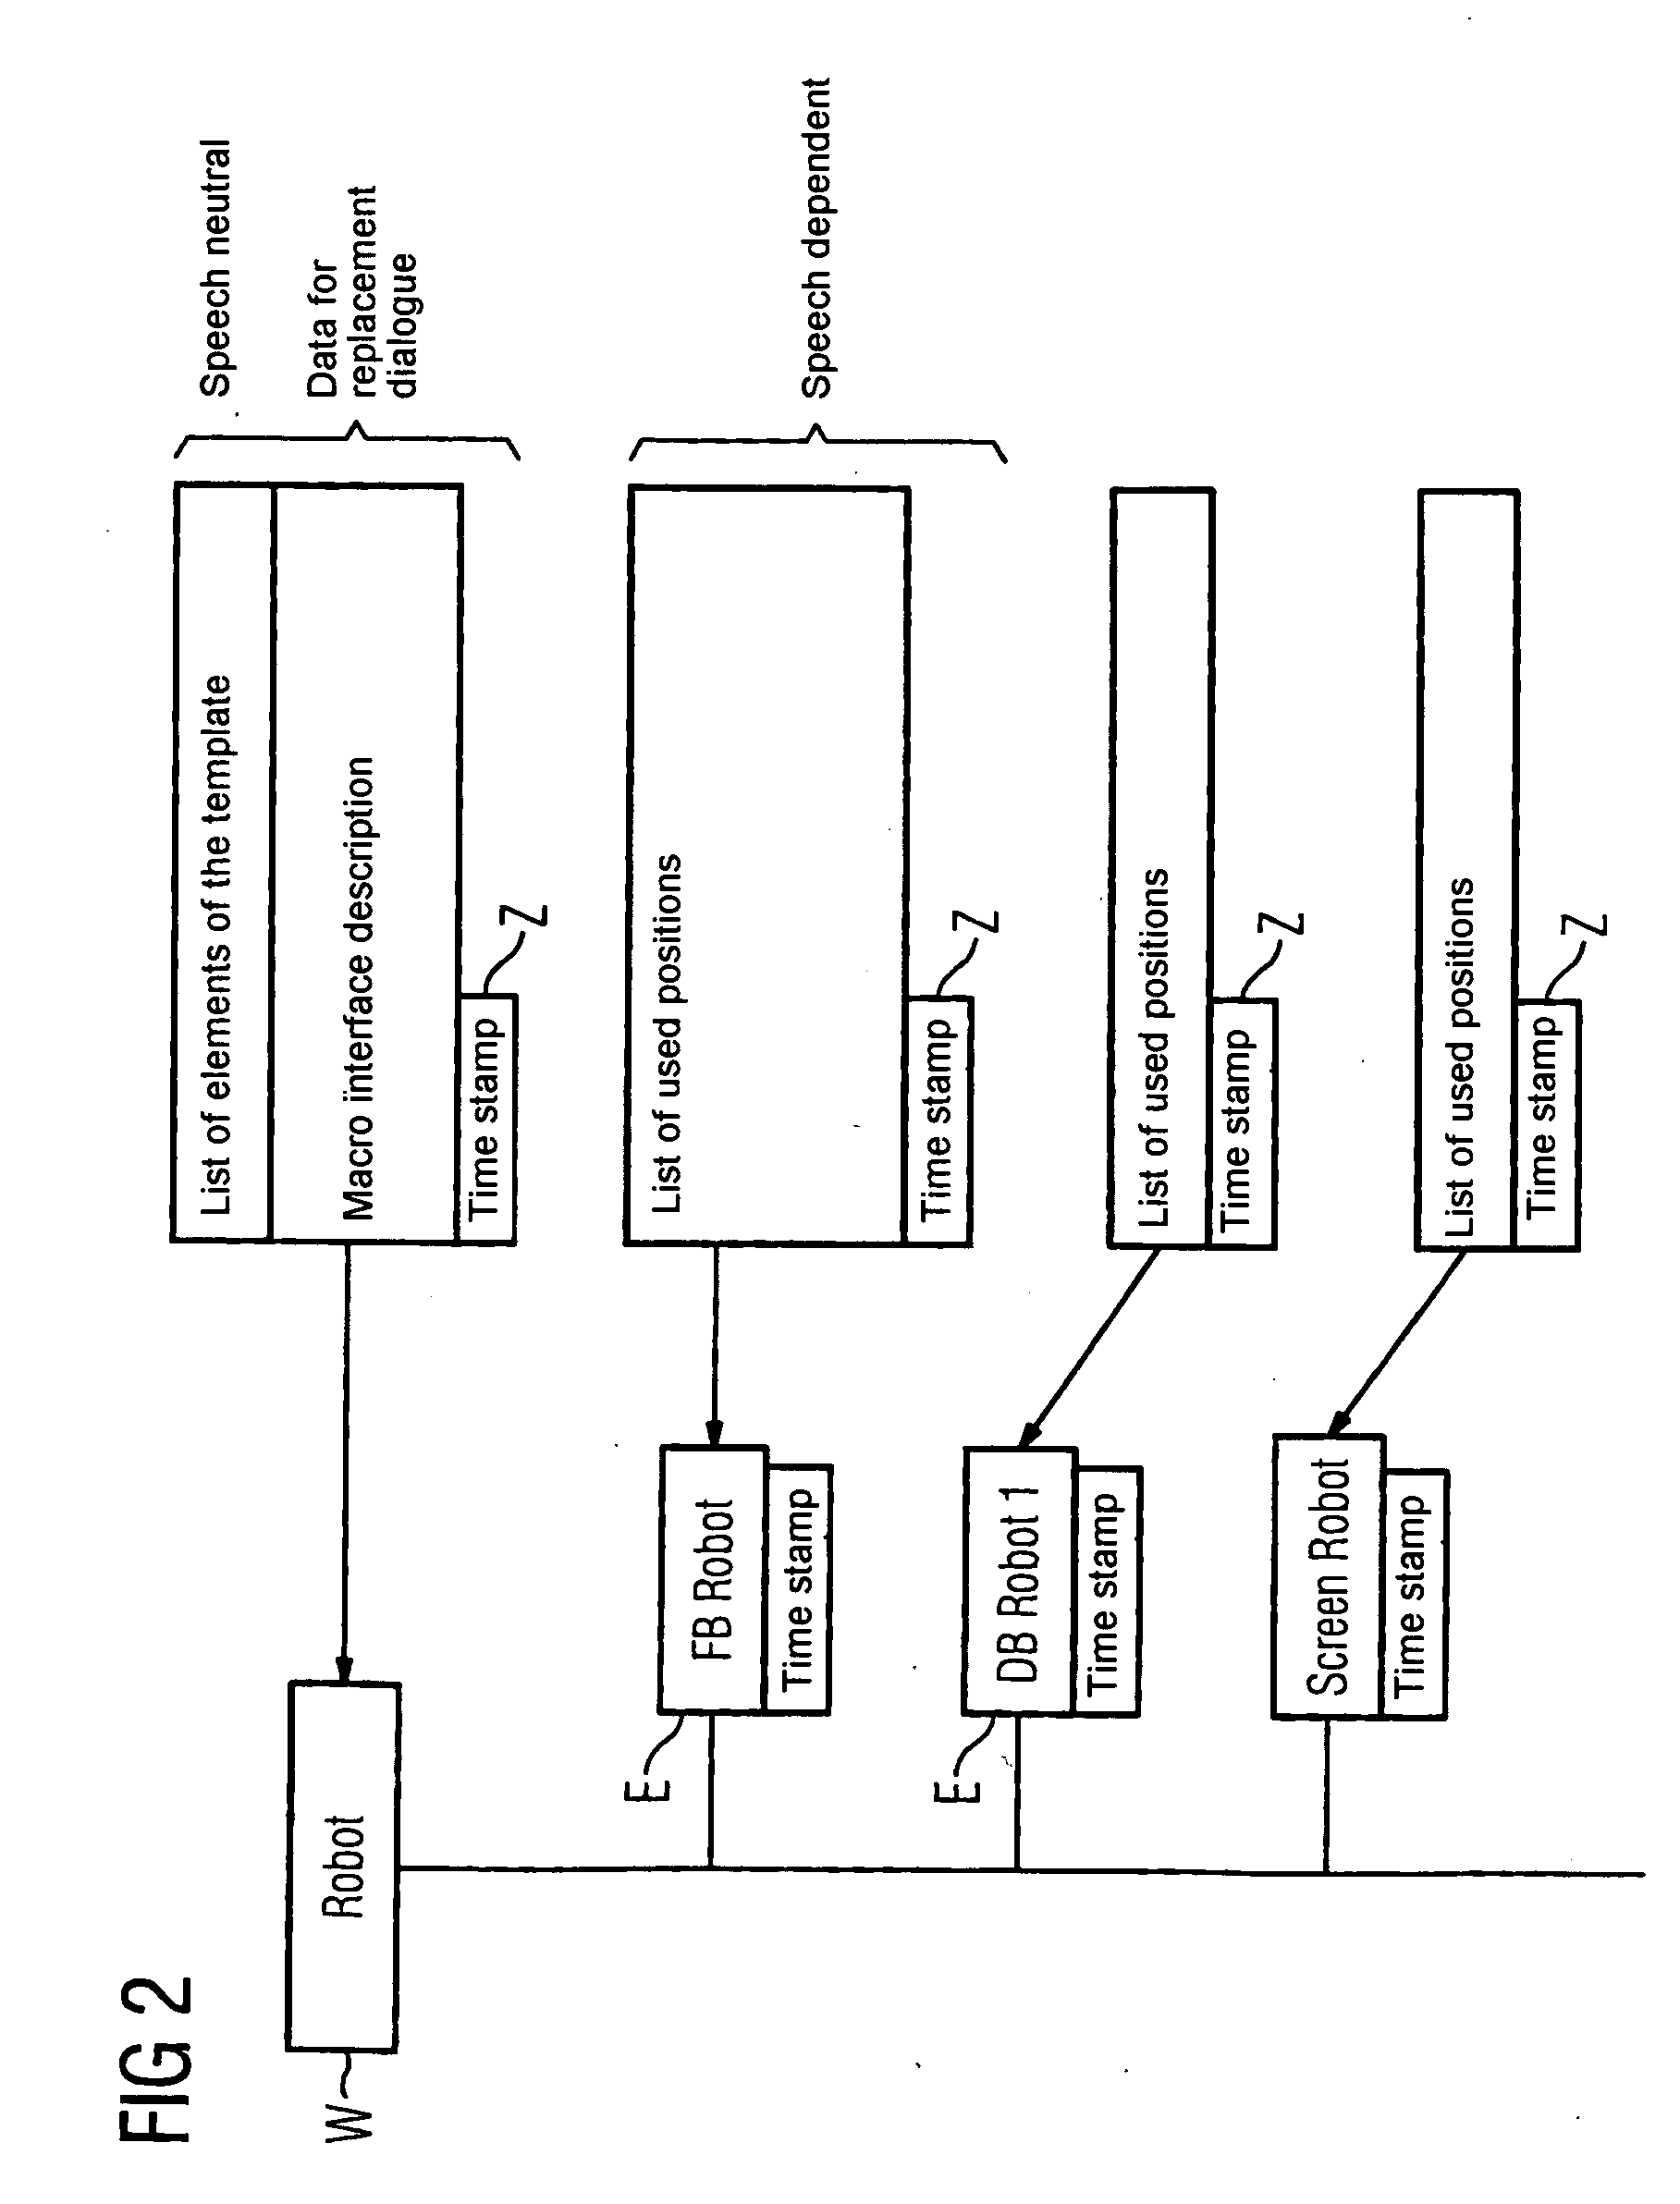 System and method for reusing project planning data